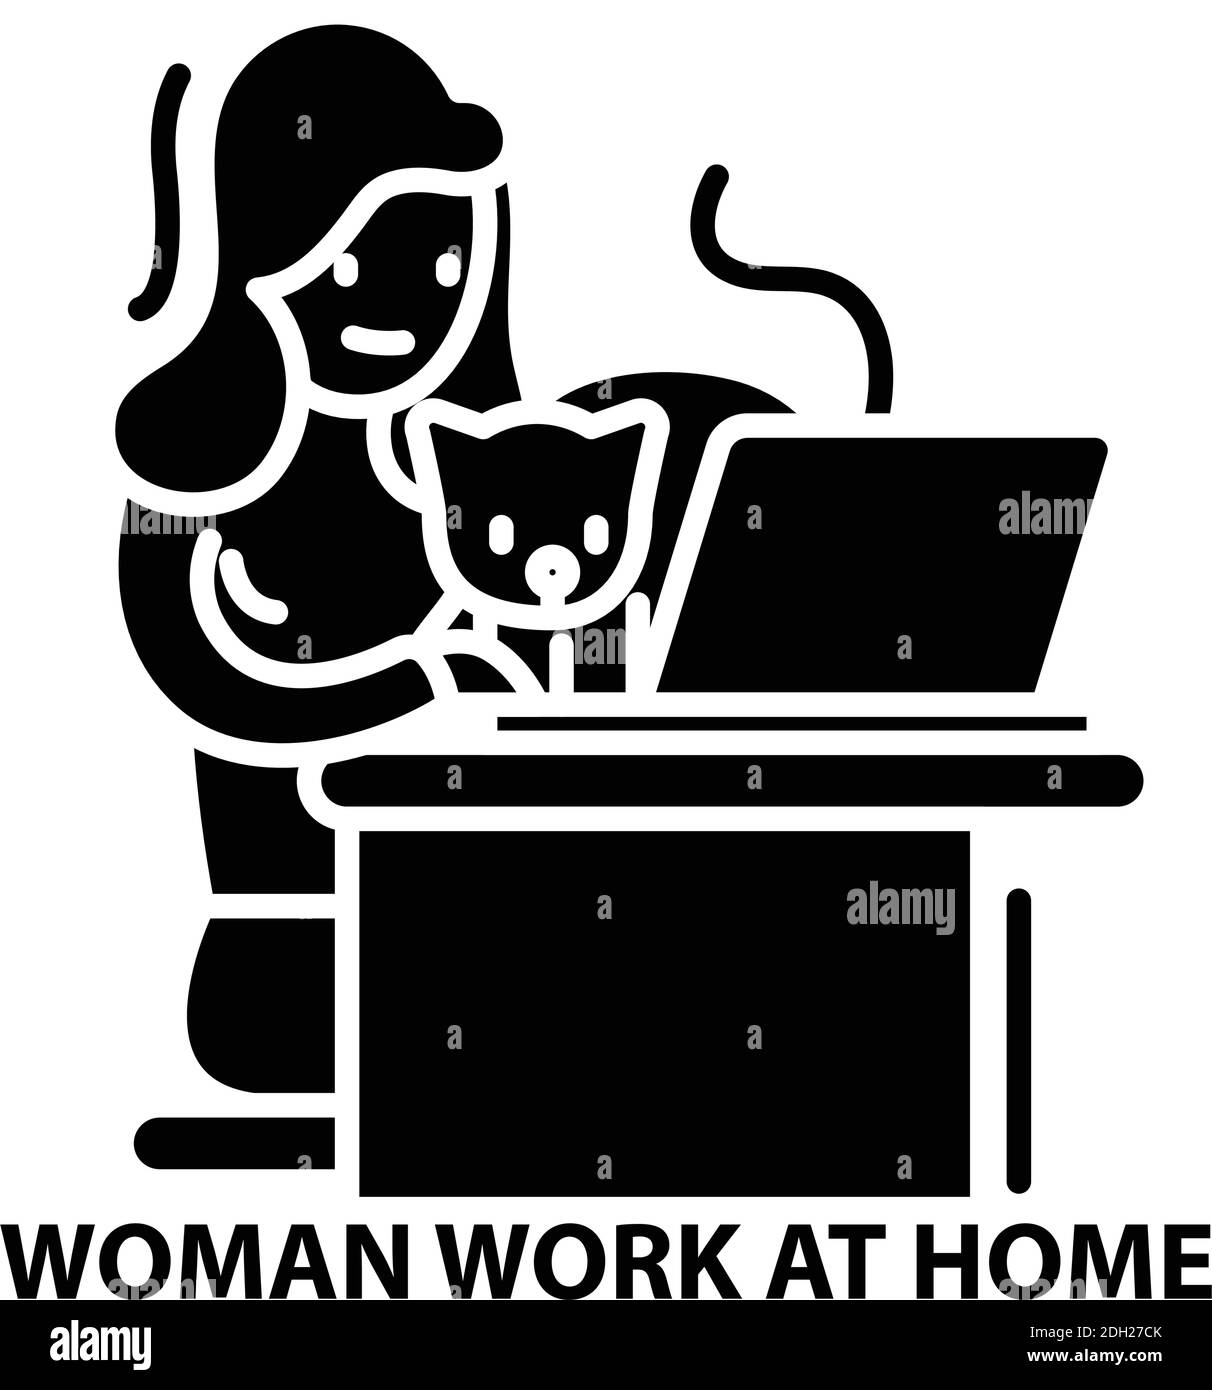 woman work at home icon, black vector sign with editable strokes, concept illustration Stock Vector